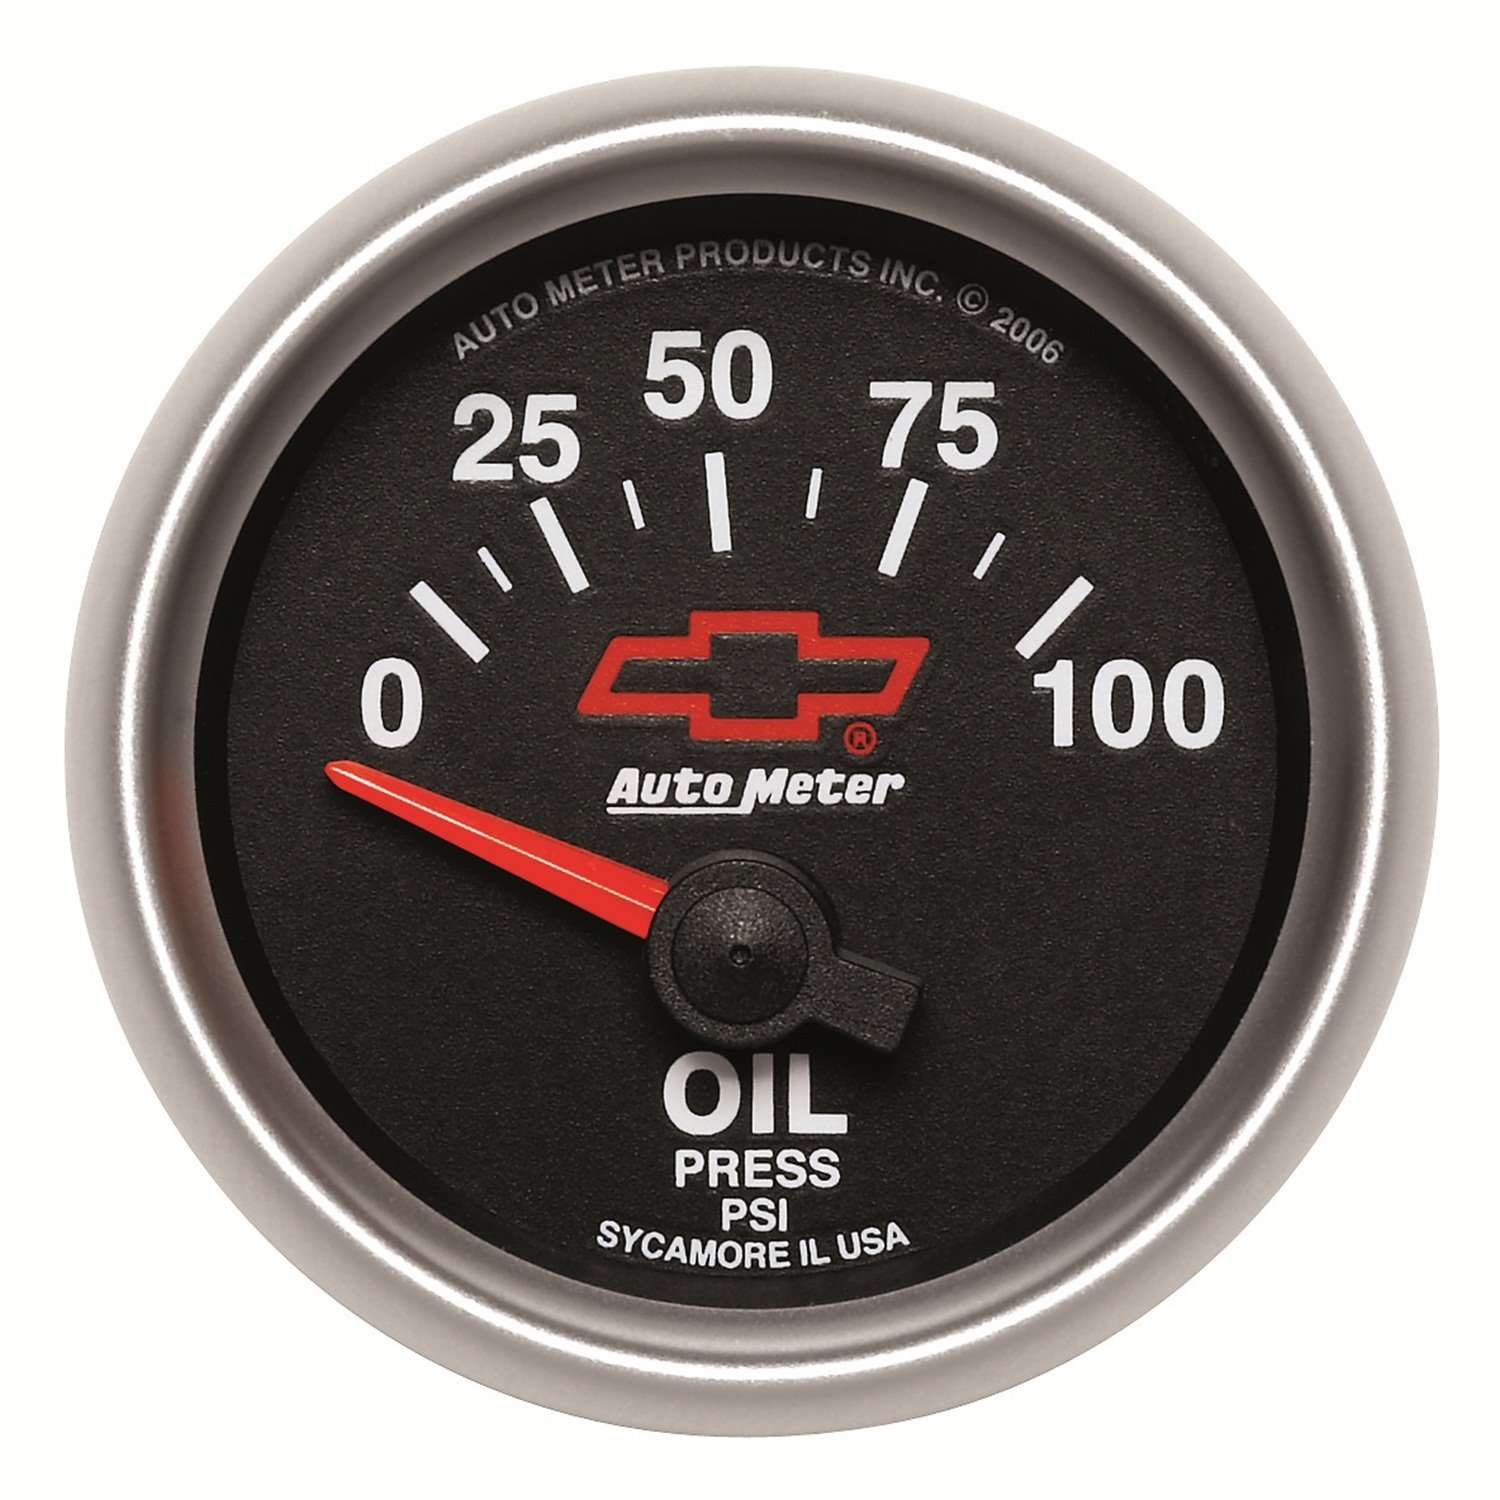 Officially Licensed Chevrolet Performance Oil Pressure Gauge 2-1/16" Electrical